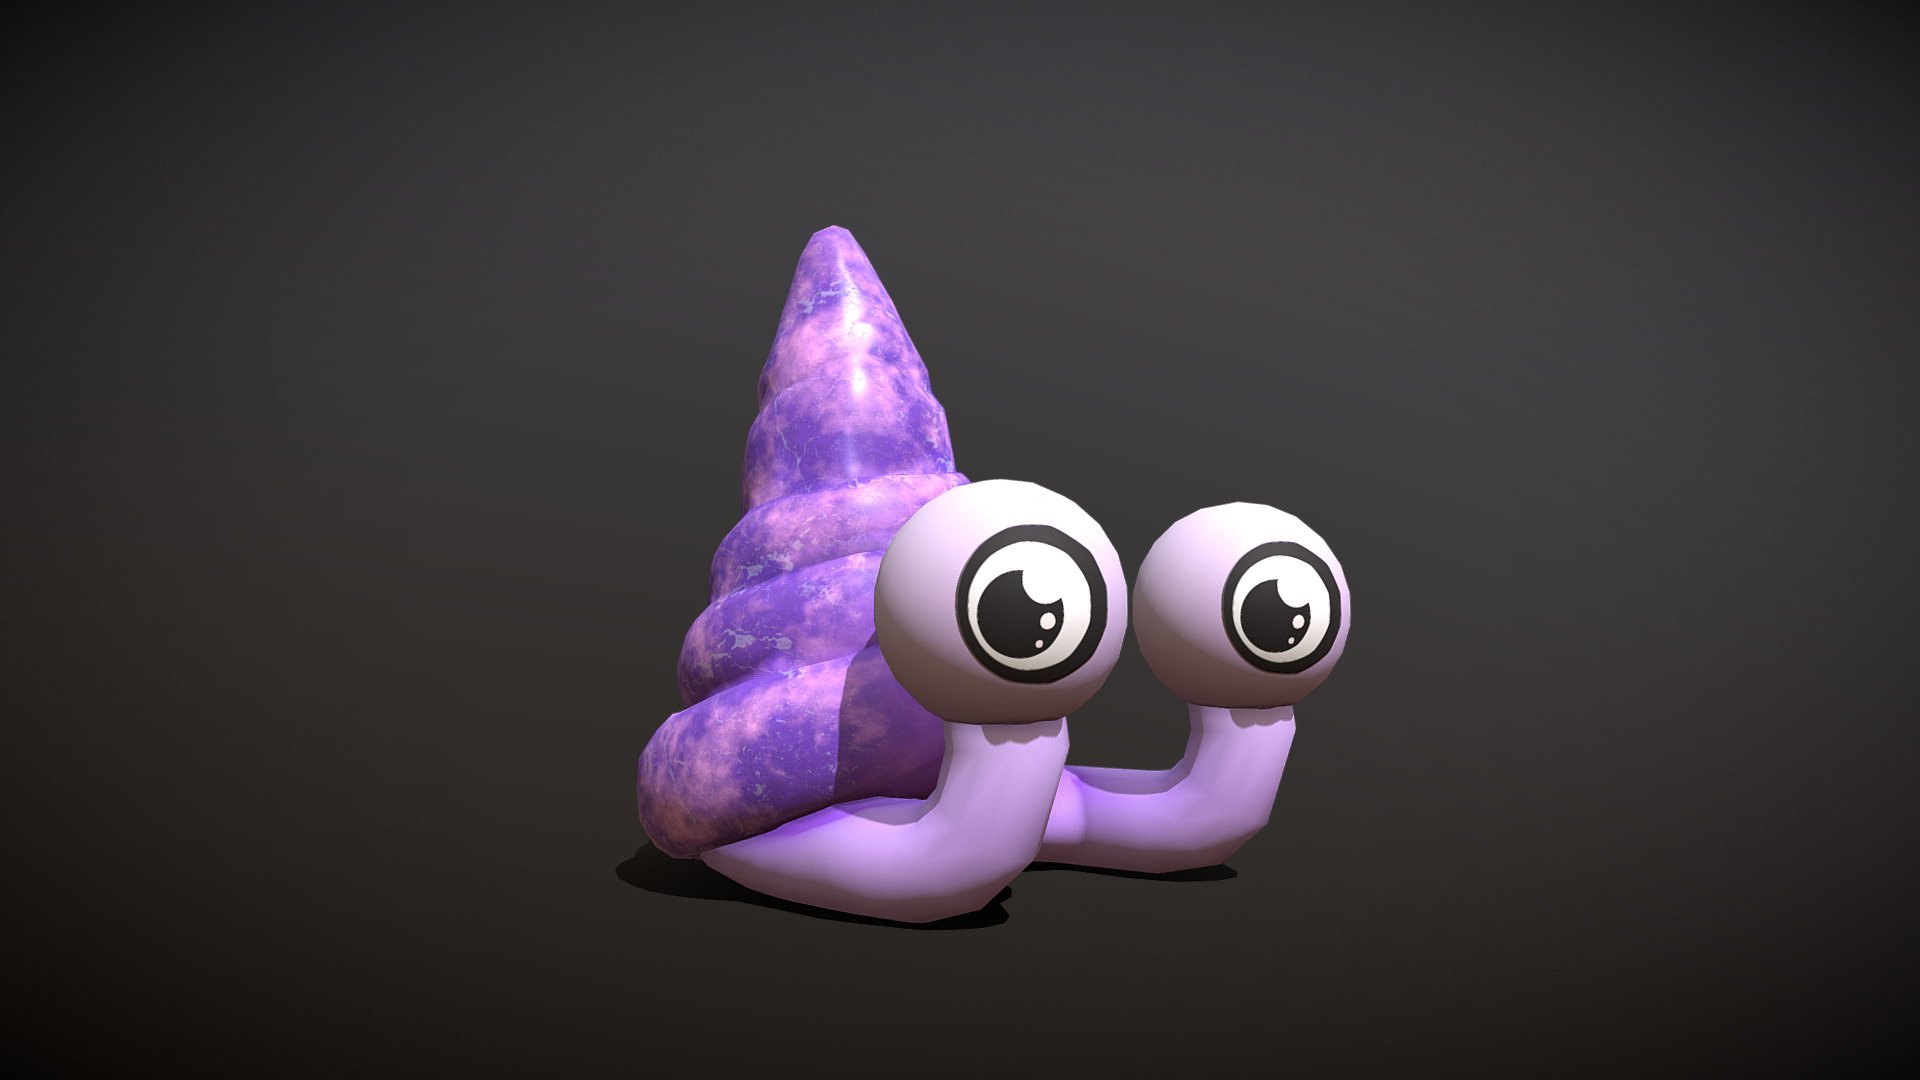 Cute character for &ldquo;Snail